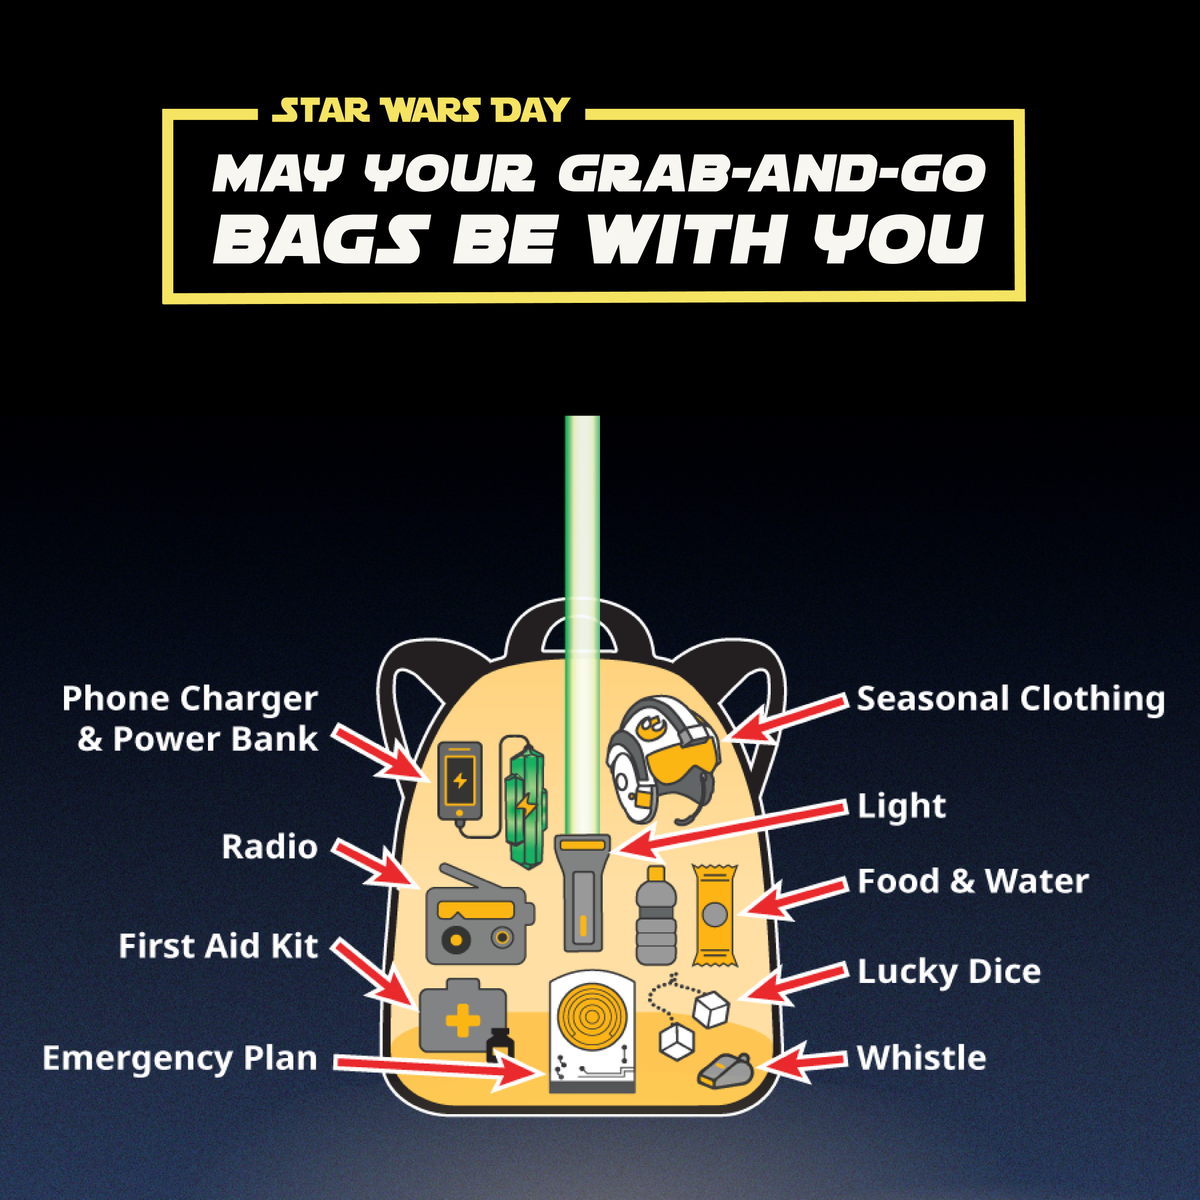 On #StarWarsDay, get prepared for possible galactic emergencies! ⭐ Whether it's a meteor storm or other unexpected event, having a grab-and-go bag can make a significant difference in your ability to remain calm. Just like a #Jedi. Learn more: preparedbc.ca/emergencykit